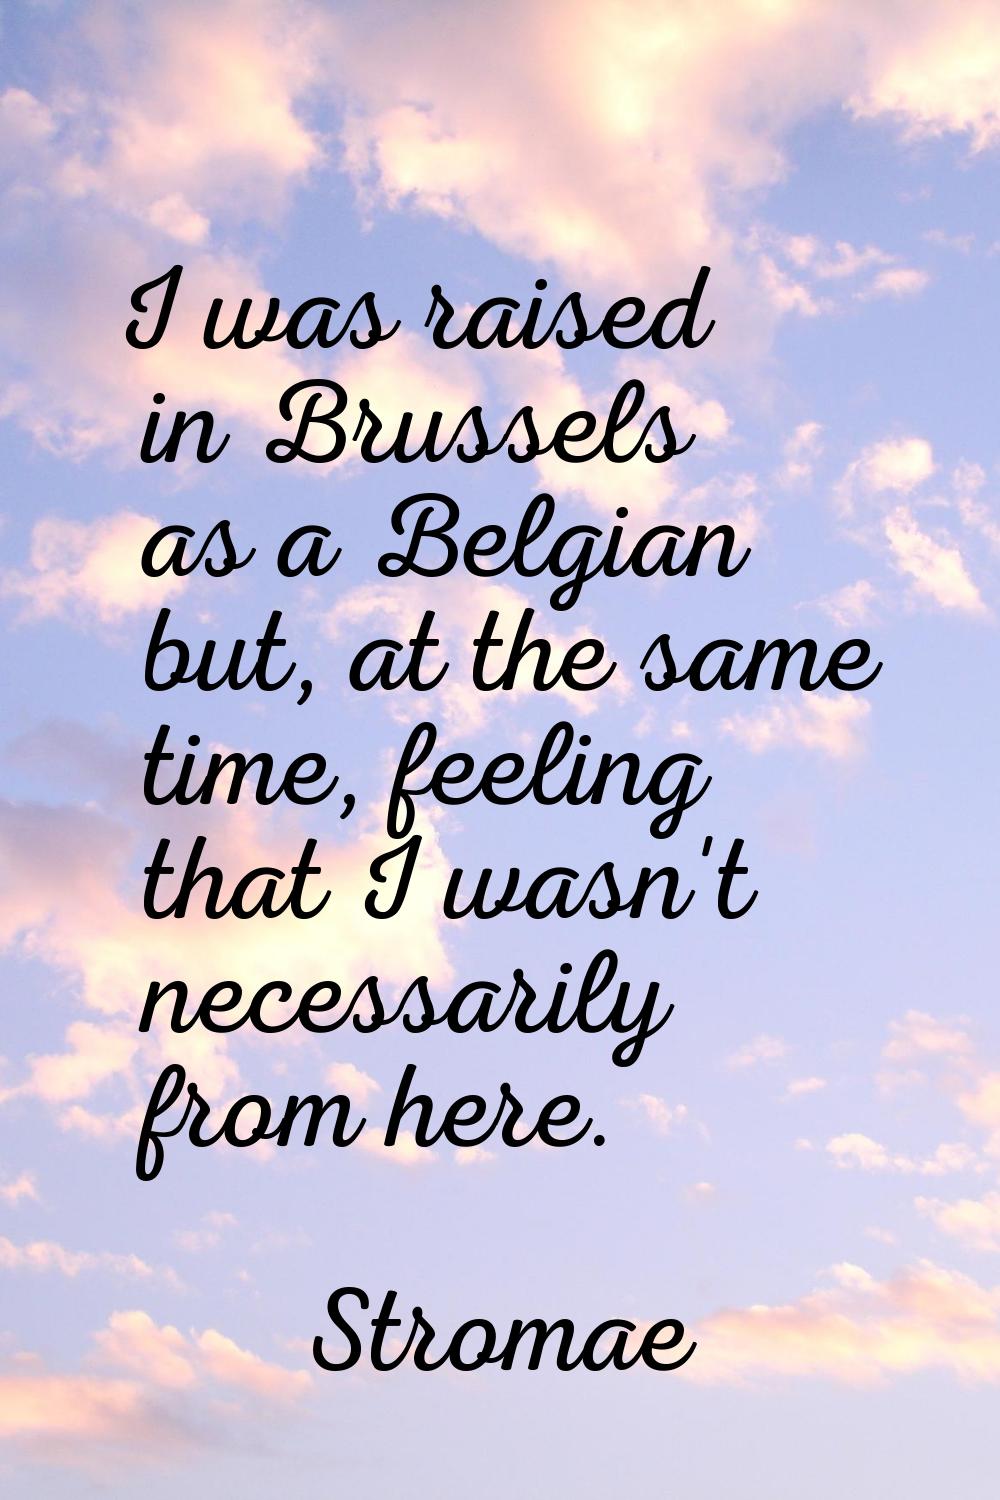 I was raised in Brussels as a Belgian but, at the same time, feeling that I wasn't necessarily from